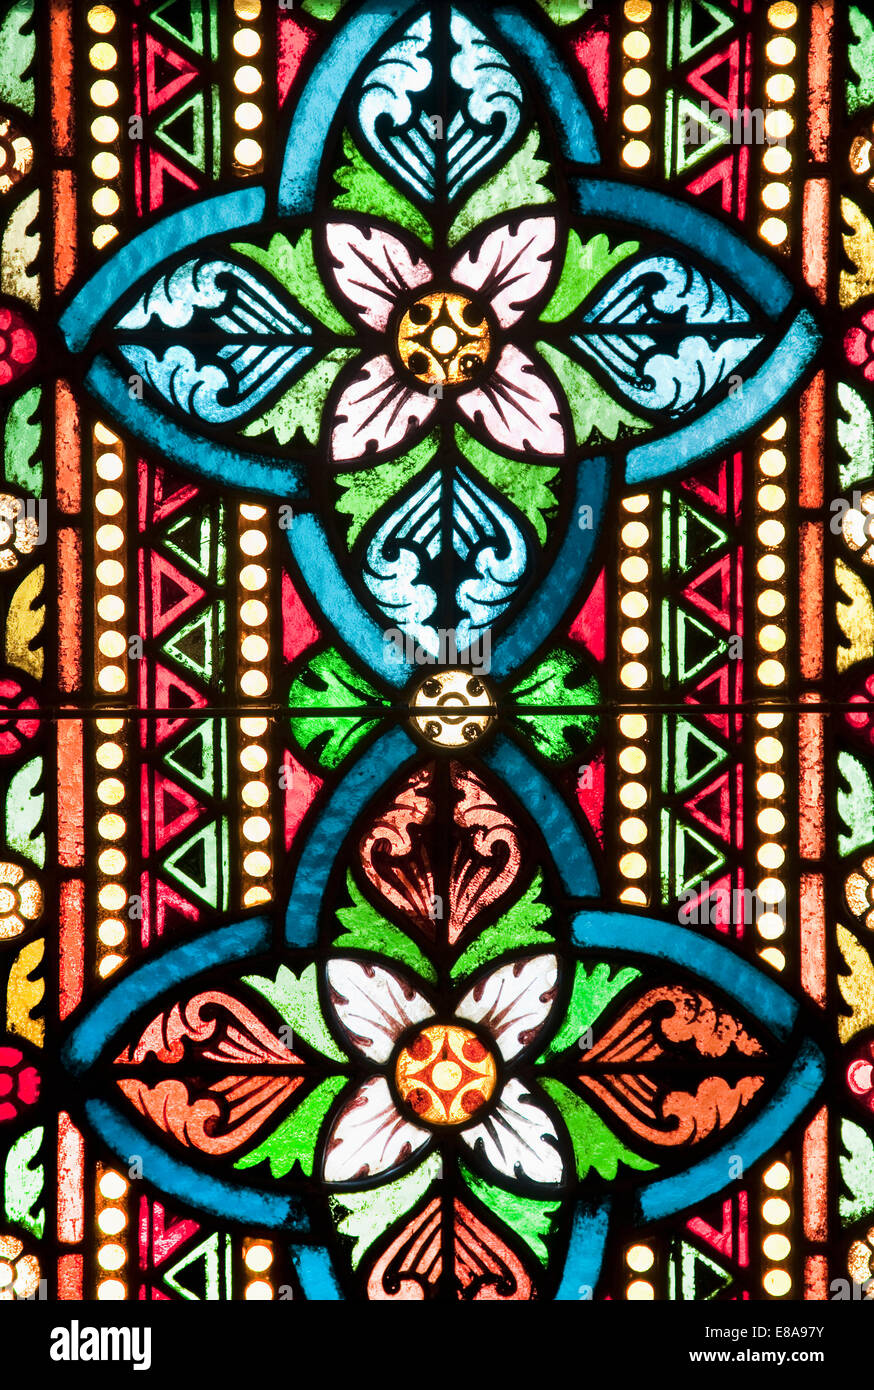 View of stained glass window in Mathias Church, Budapest, Hungary Stock Photo